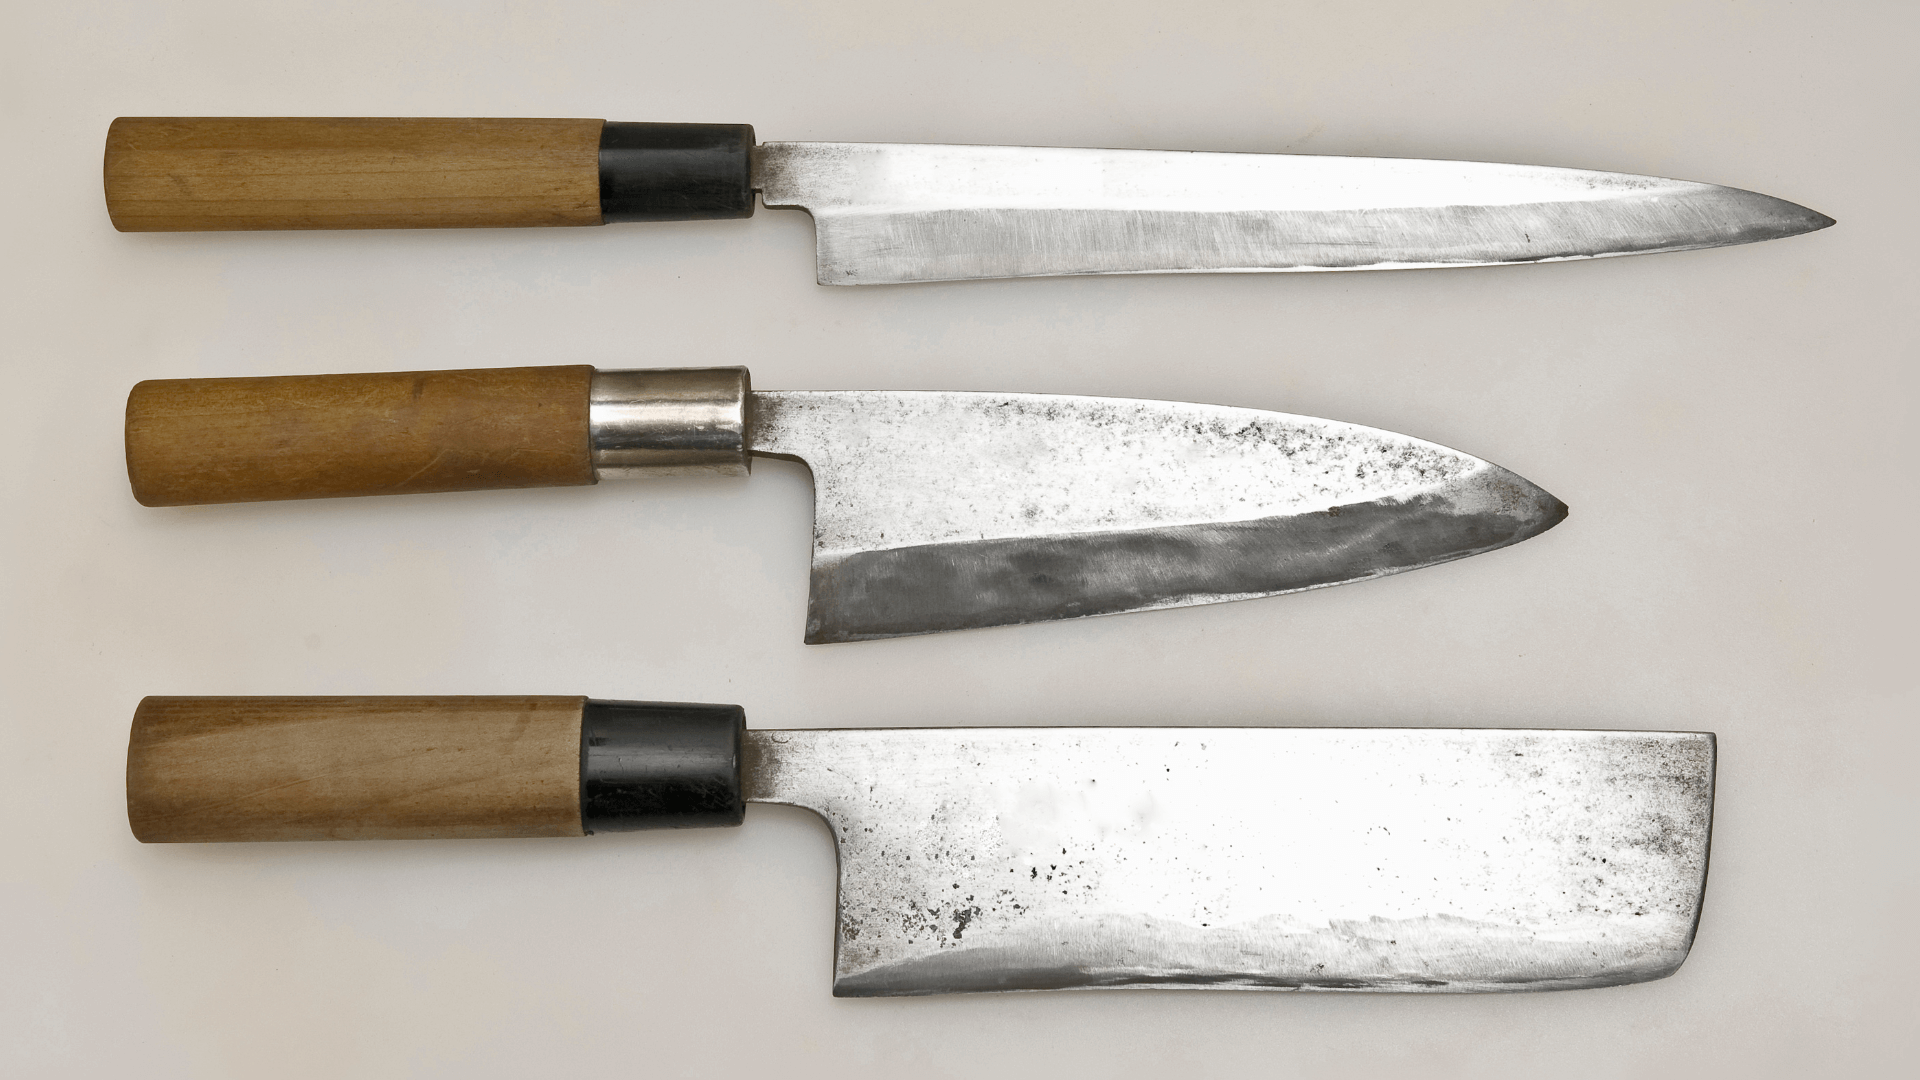 Three knives with wooden handles